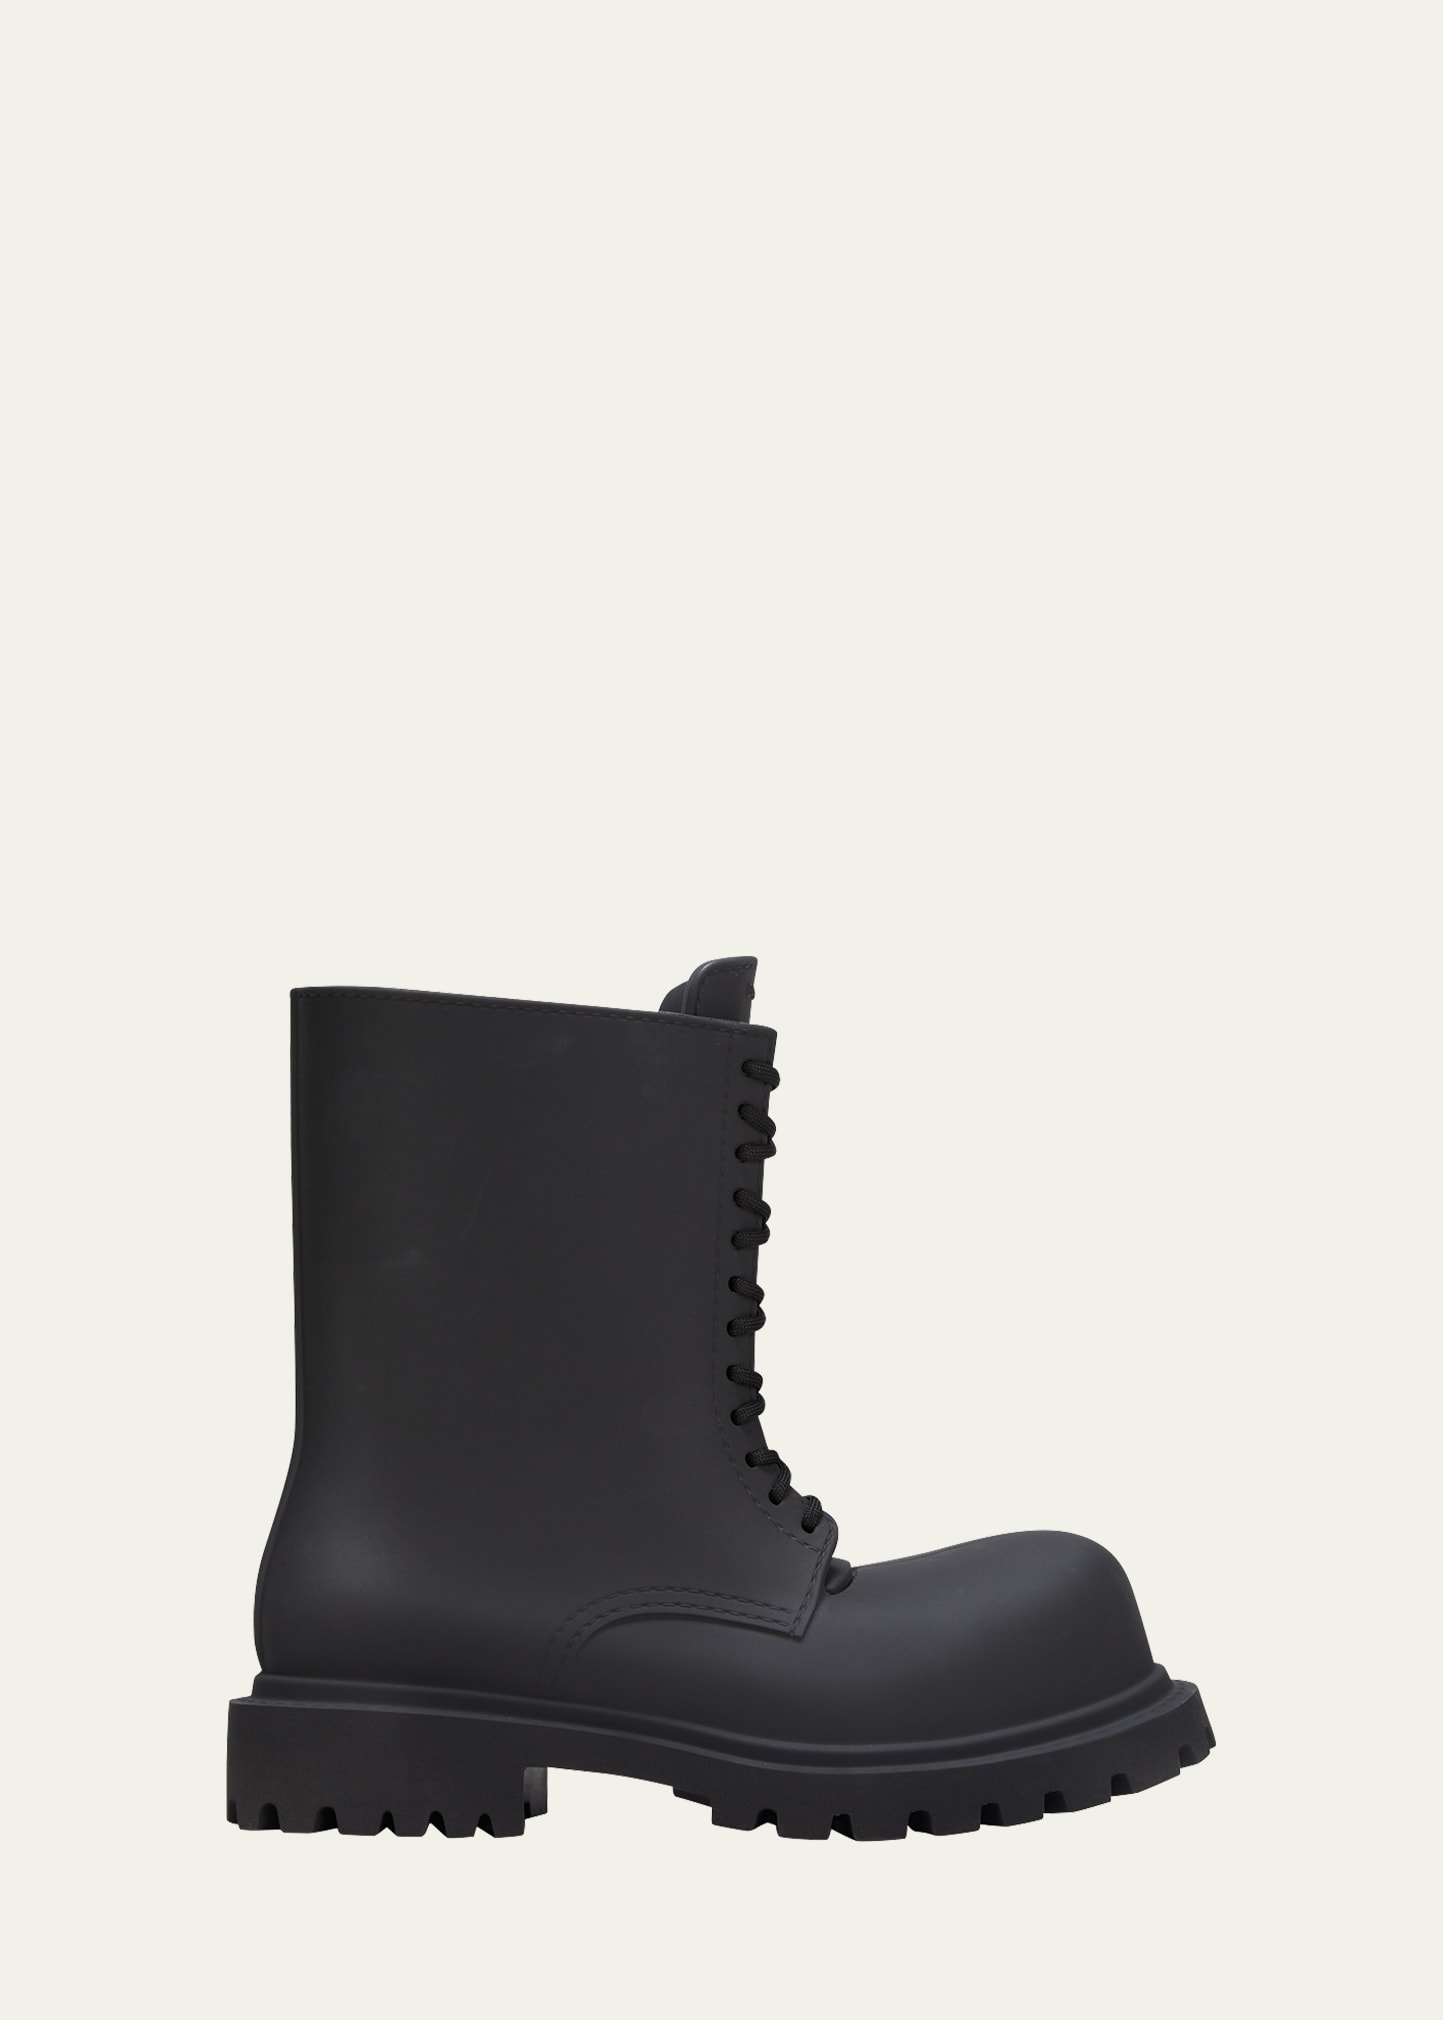 BALENCIAGA MEN'S STEROID OVERSIZED LEATHER ARMY BOOTS